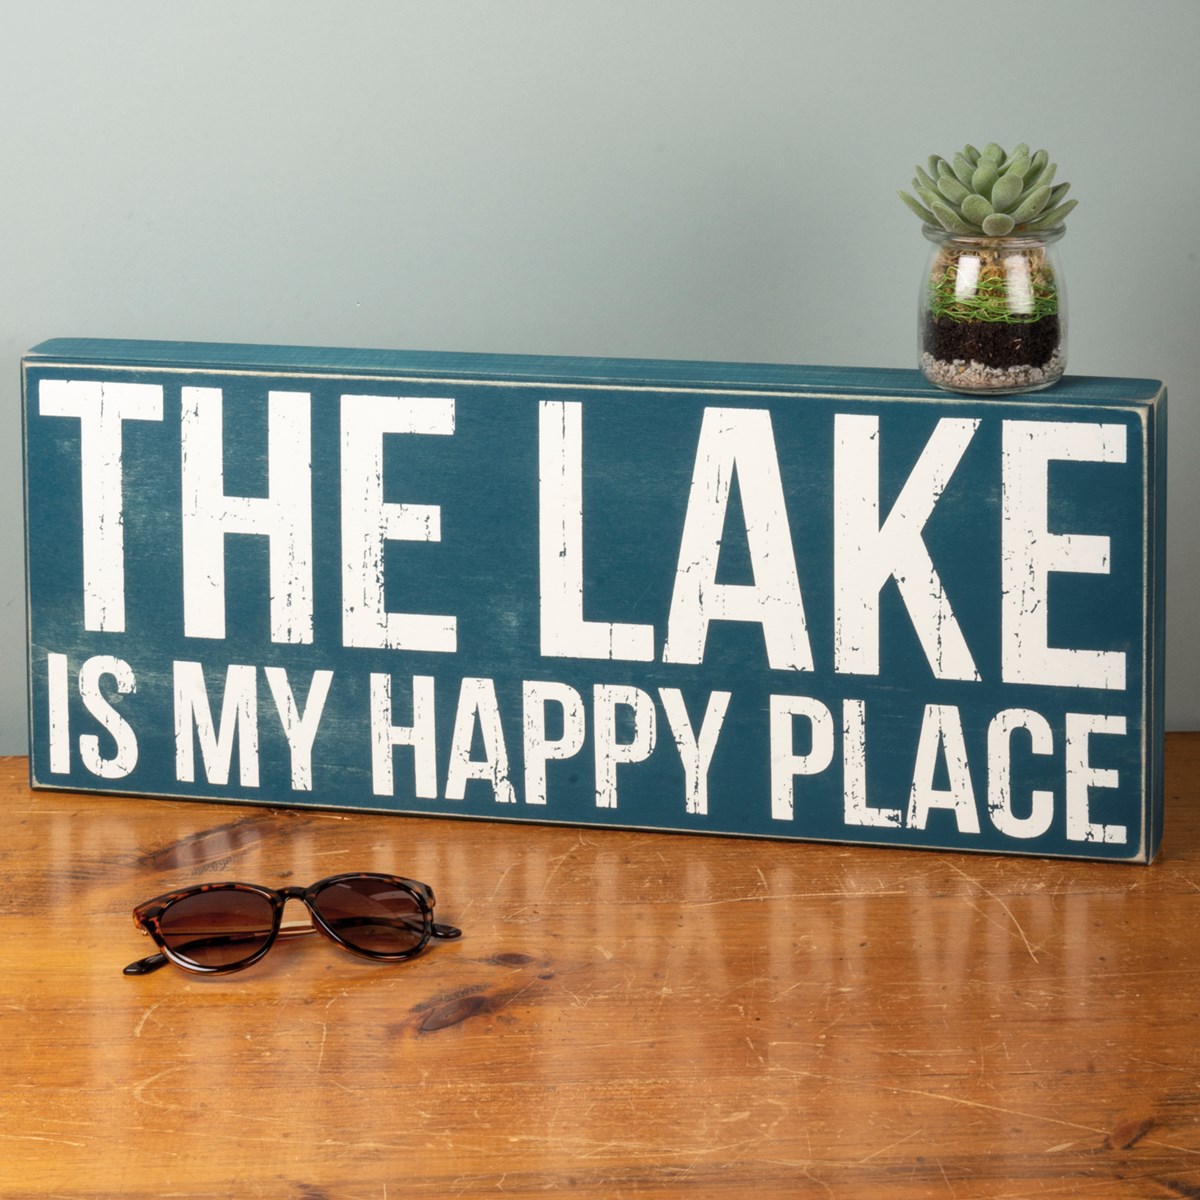 My Happy Place Box Sign - Wood